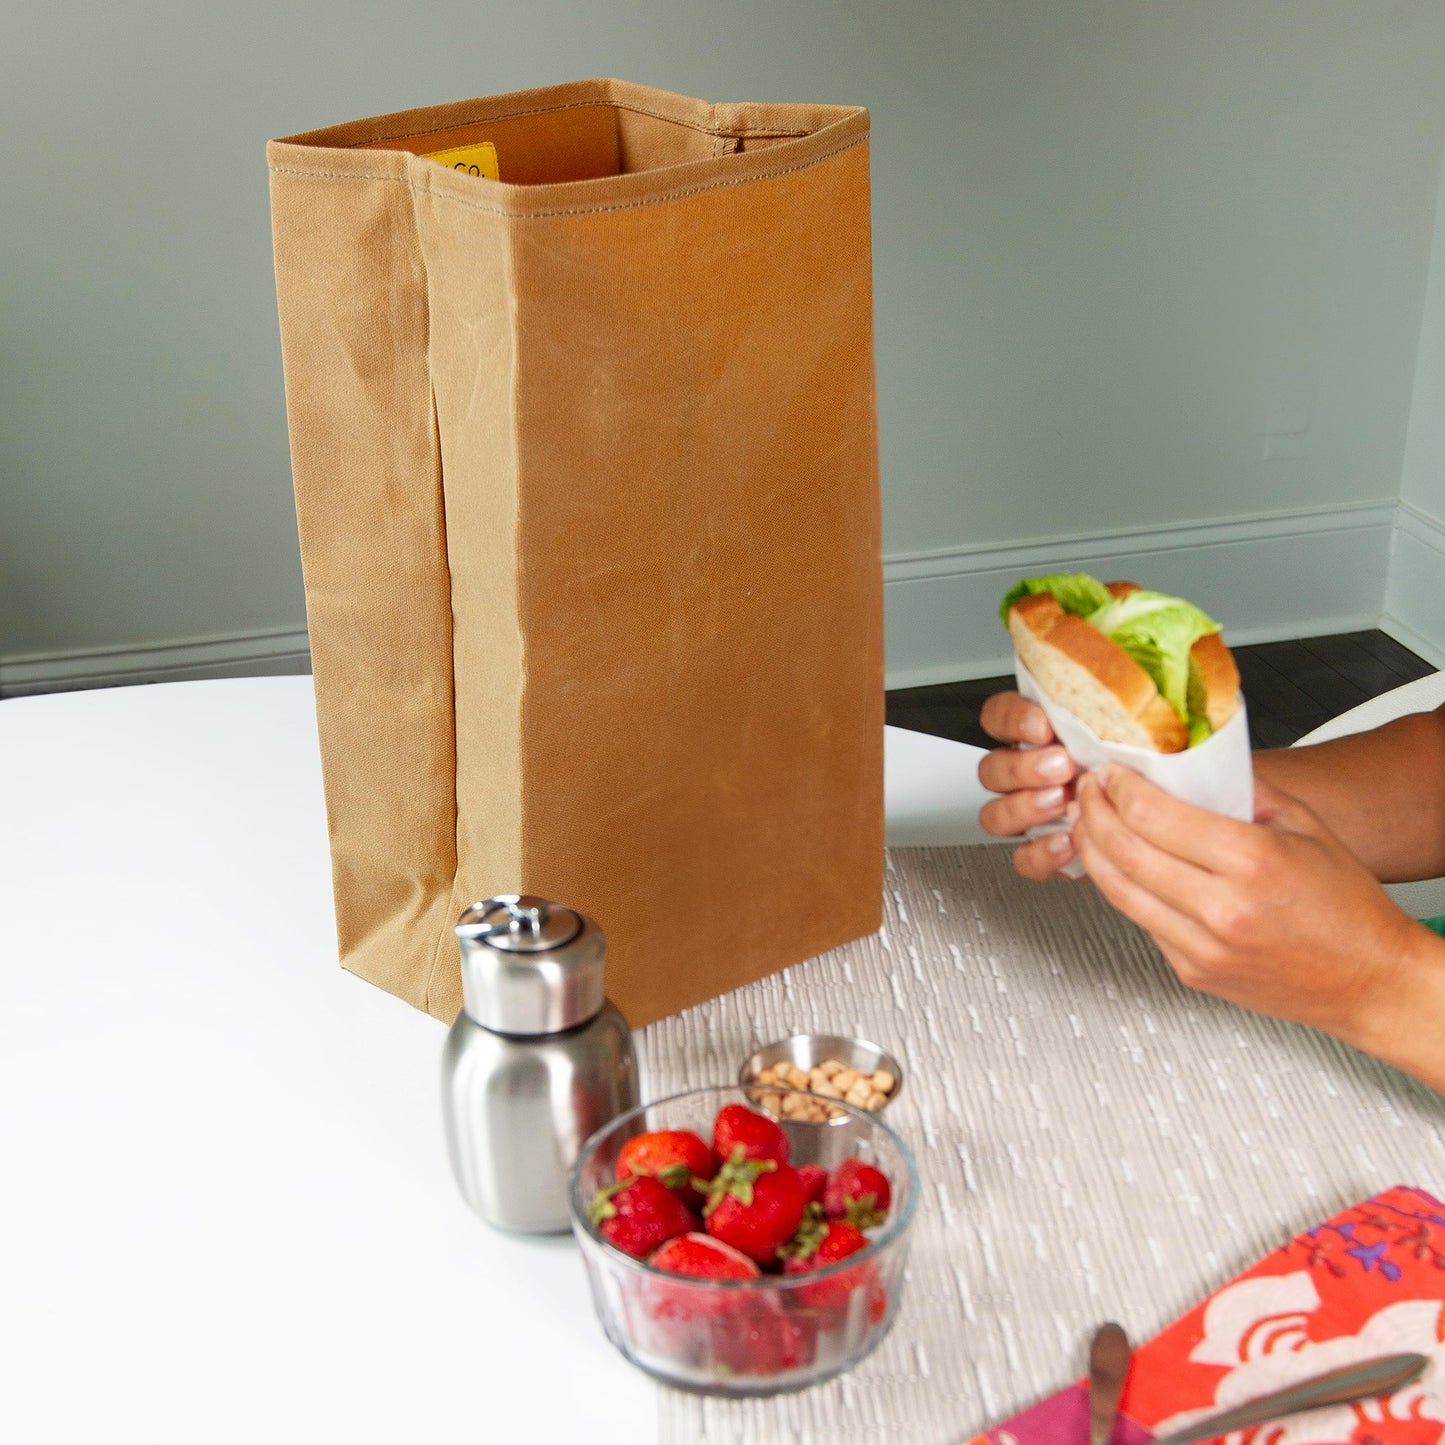 The Original Waxed Canvas Lunch Bag, Handmade with Certified Organic Cotton and Hand Waxed with Beeswax, Foldable, Stiff Material, Plastic-Free, Reusable, GOTS, Large, For Men, Women, Kids, Brown